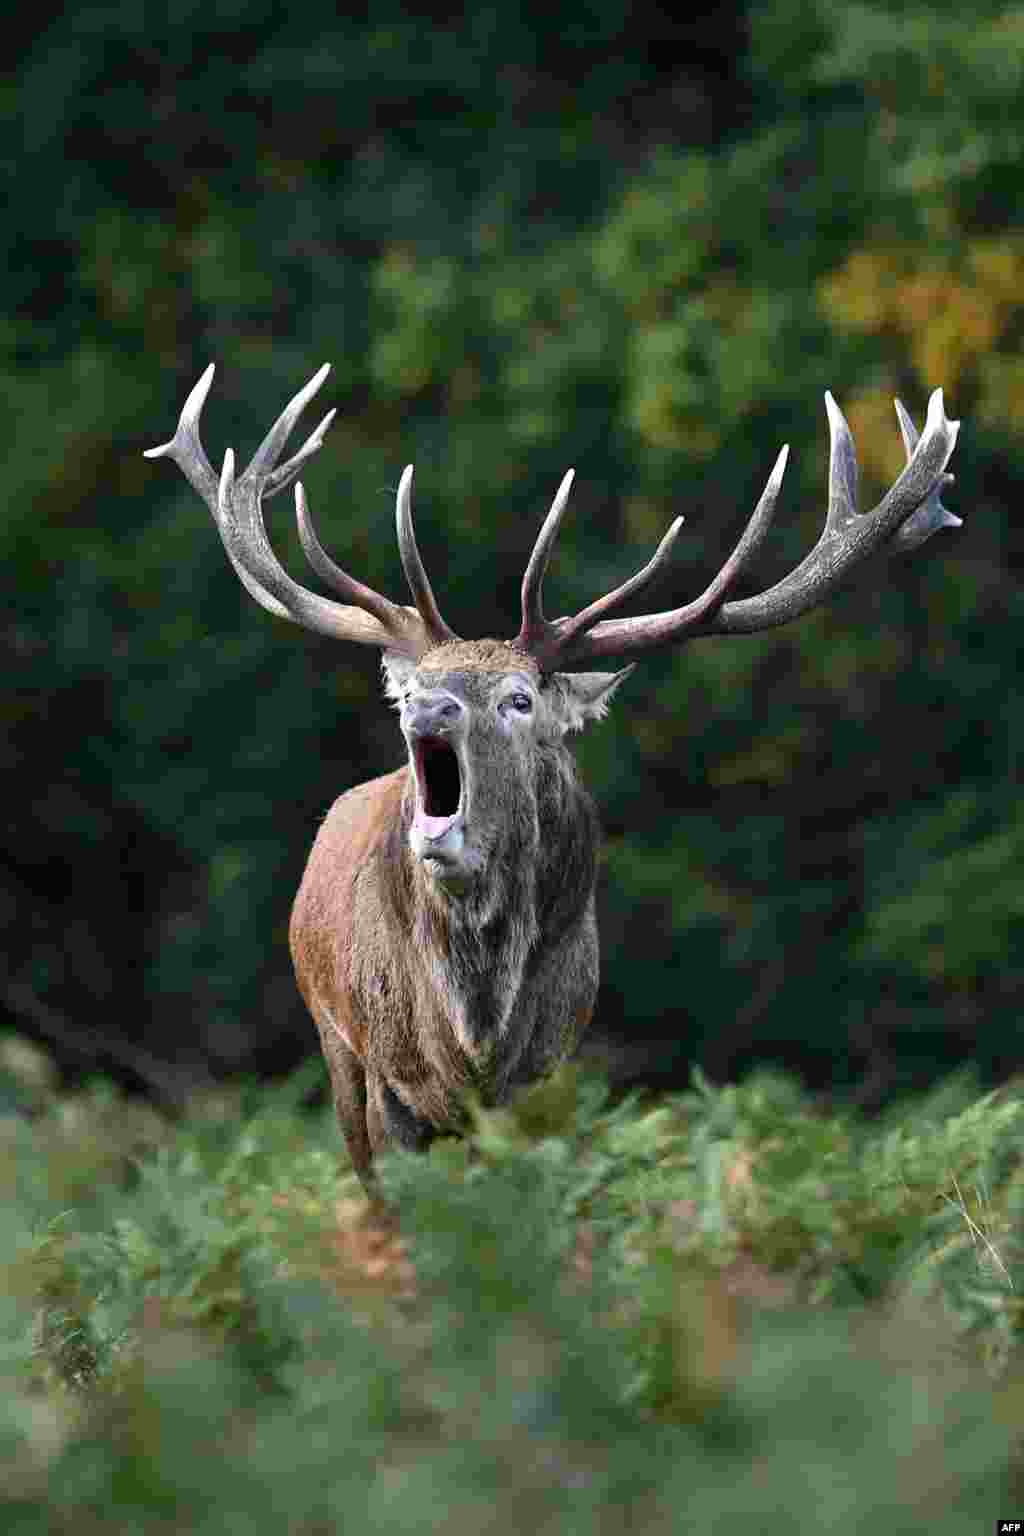 A red deer stag roars in Richmond park during its breeding season in south west London, Britain.